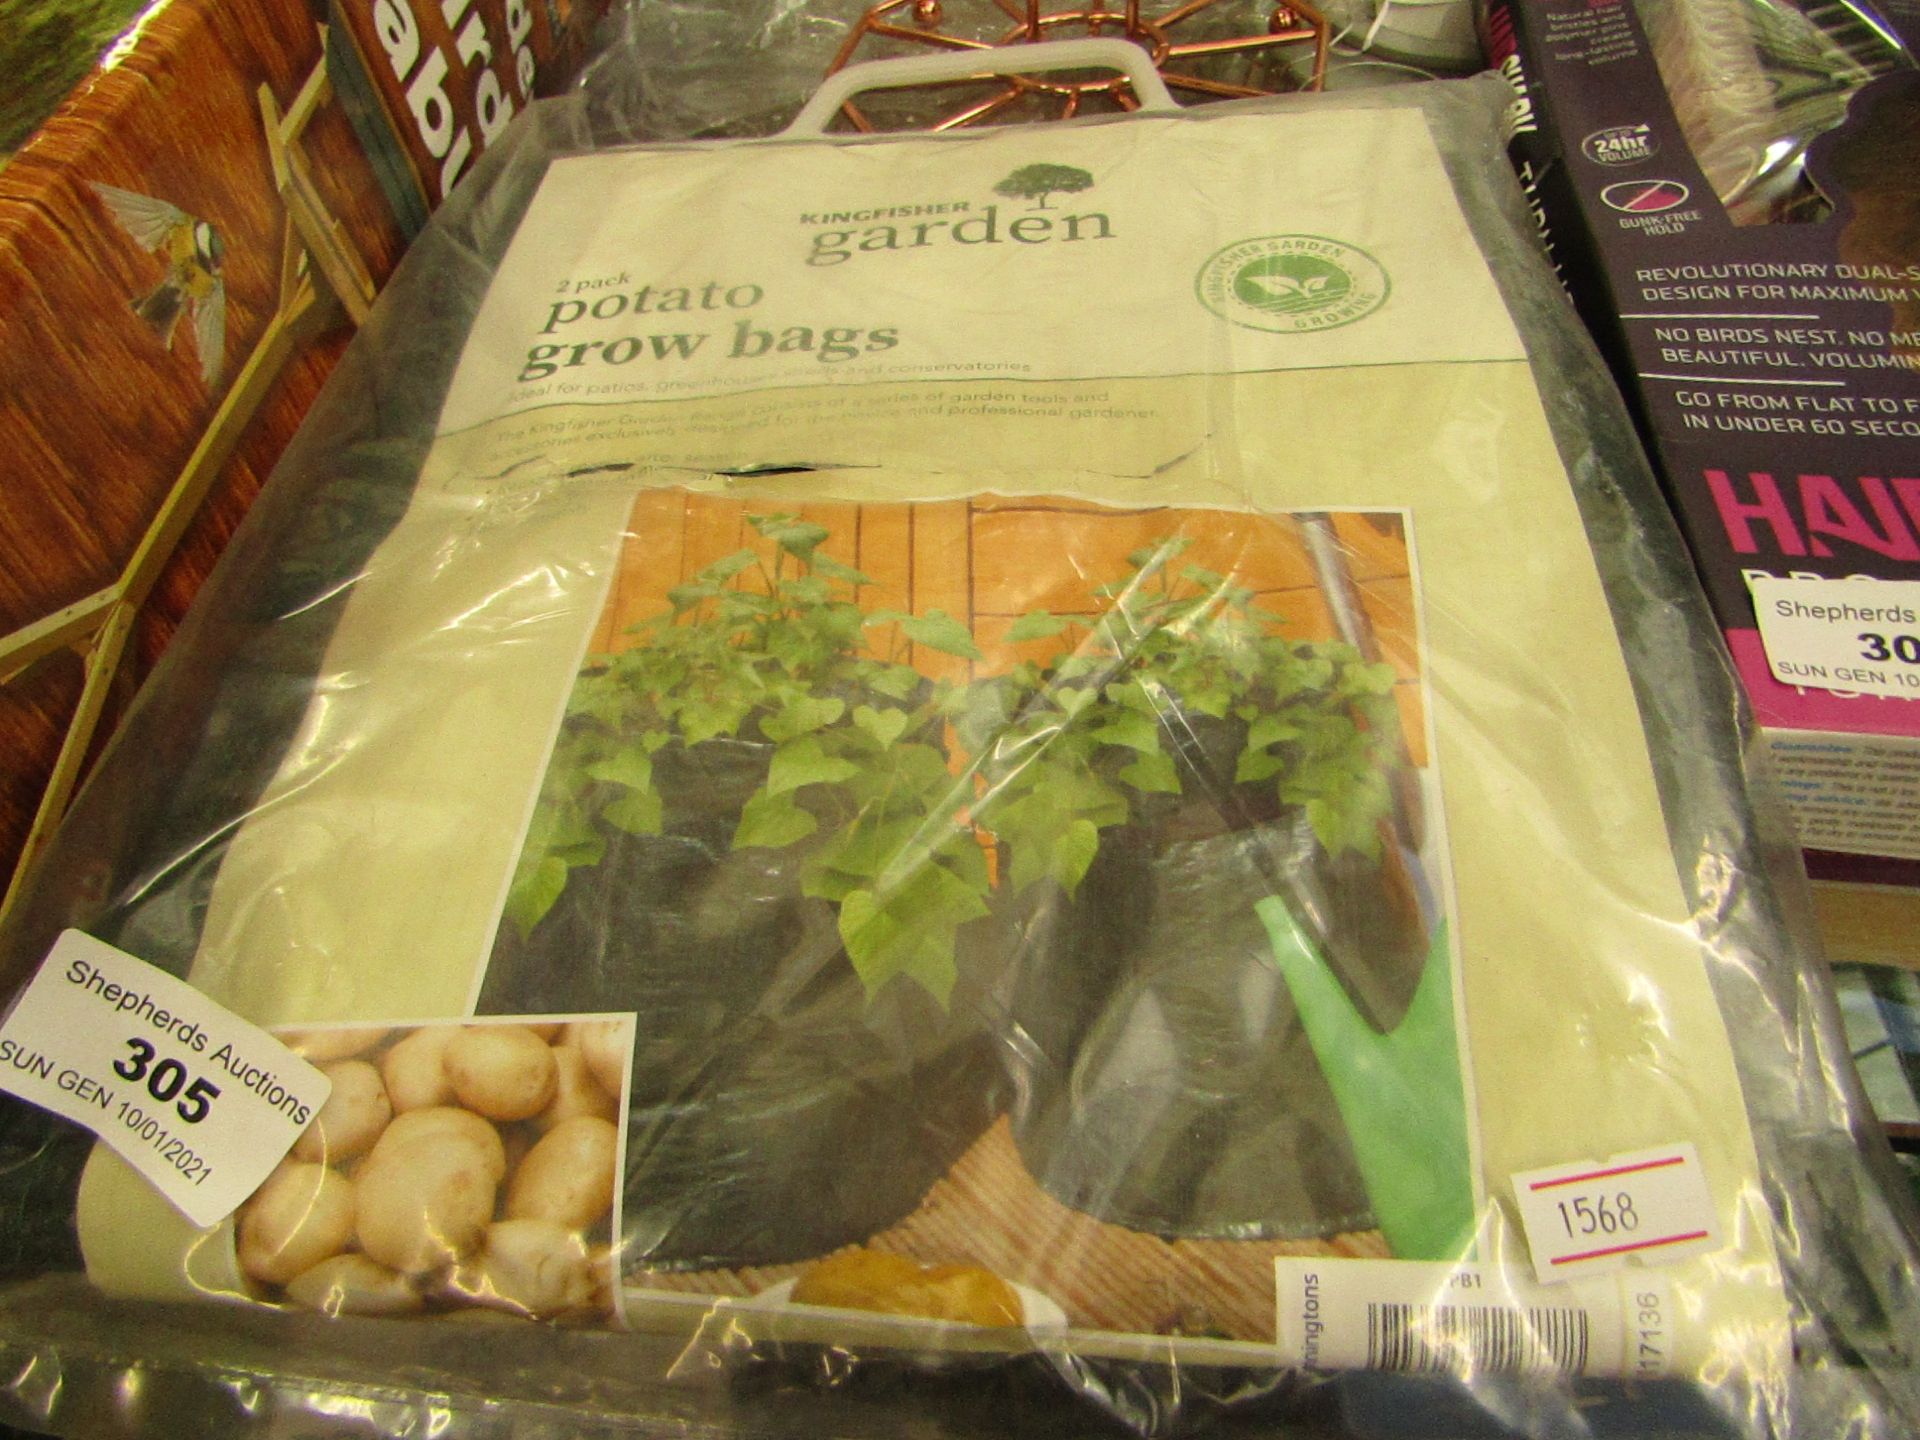 Kingfisher - 2 Pack Potato Grow Bags - Unchecked & Packaged.